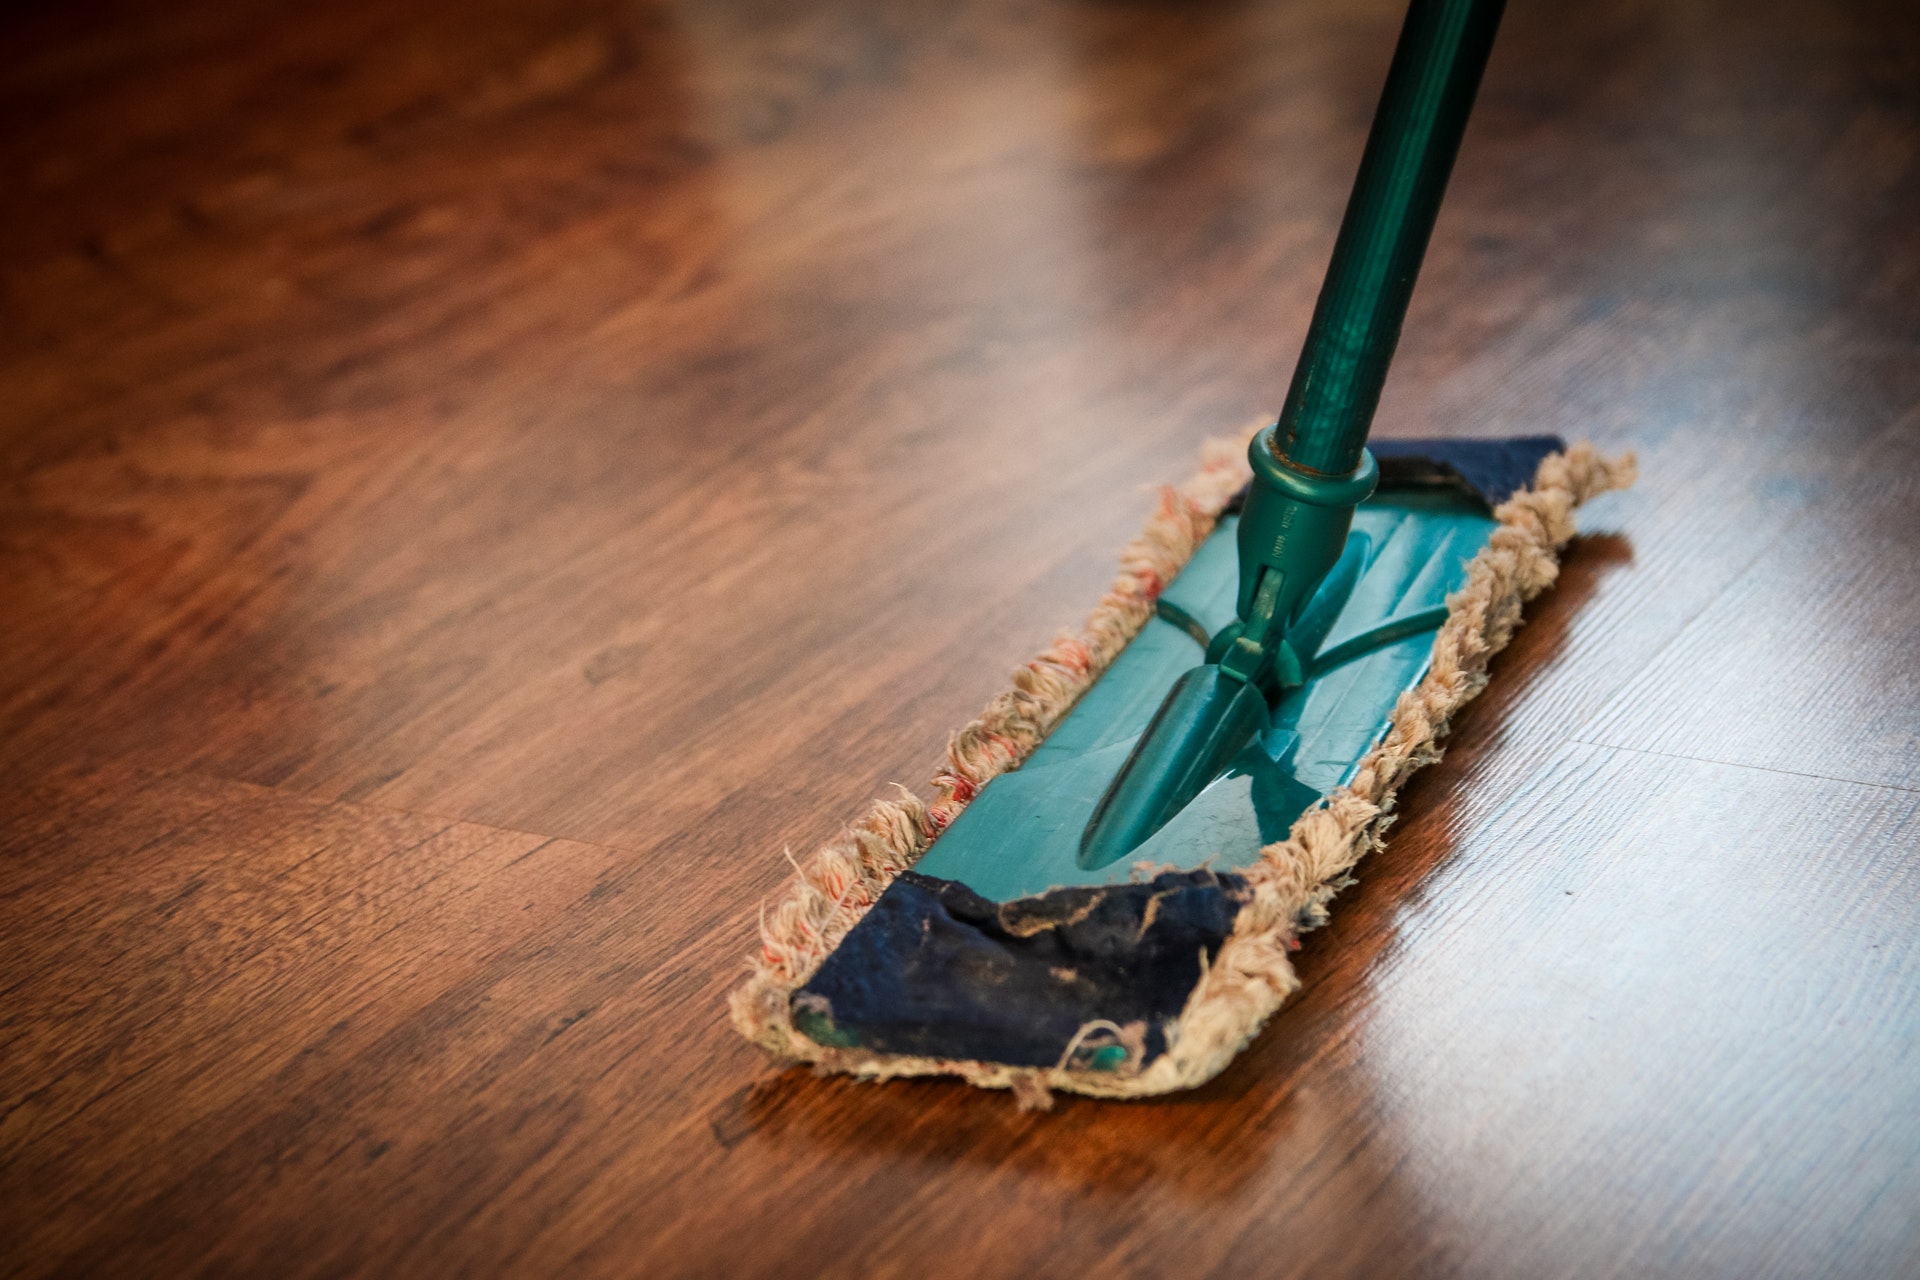 What You Should Know About Cleaning Wood Floors